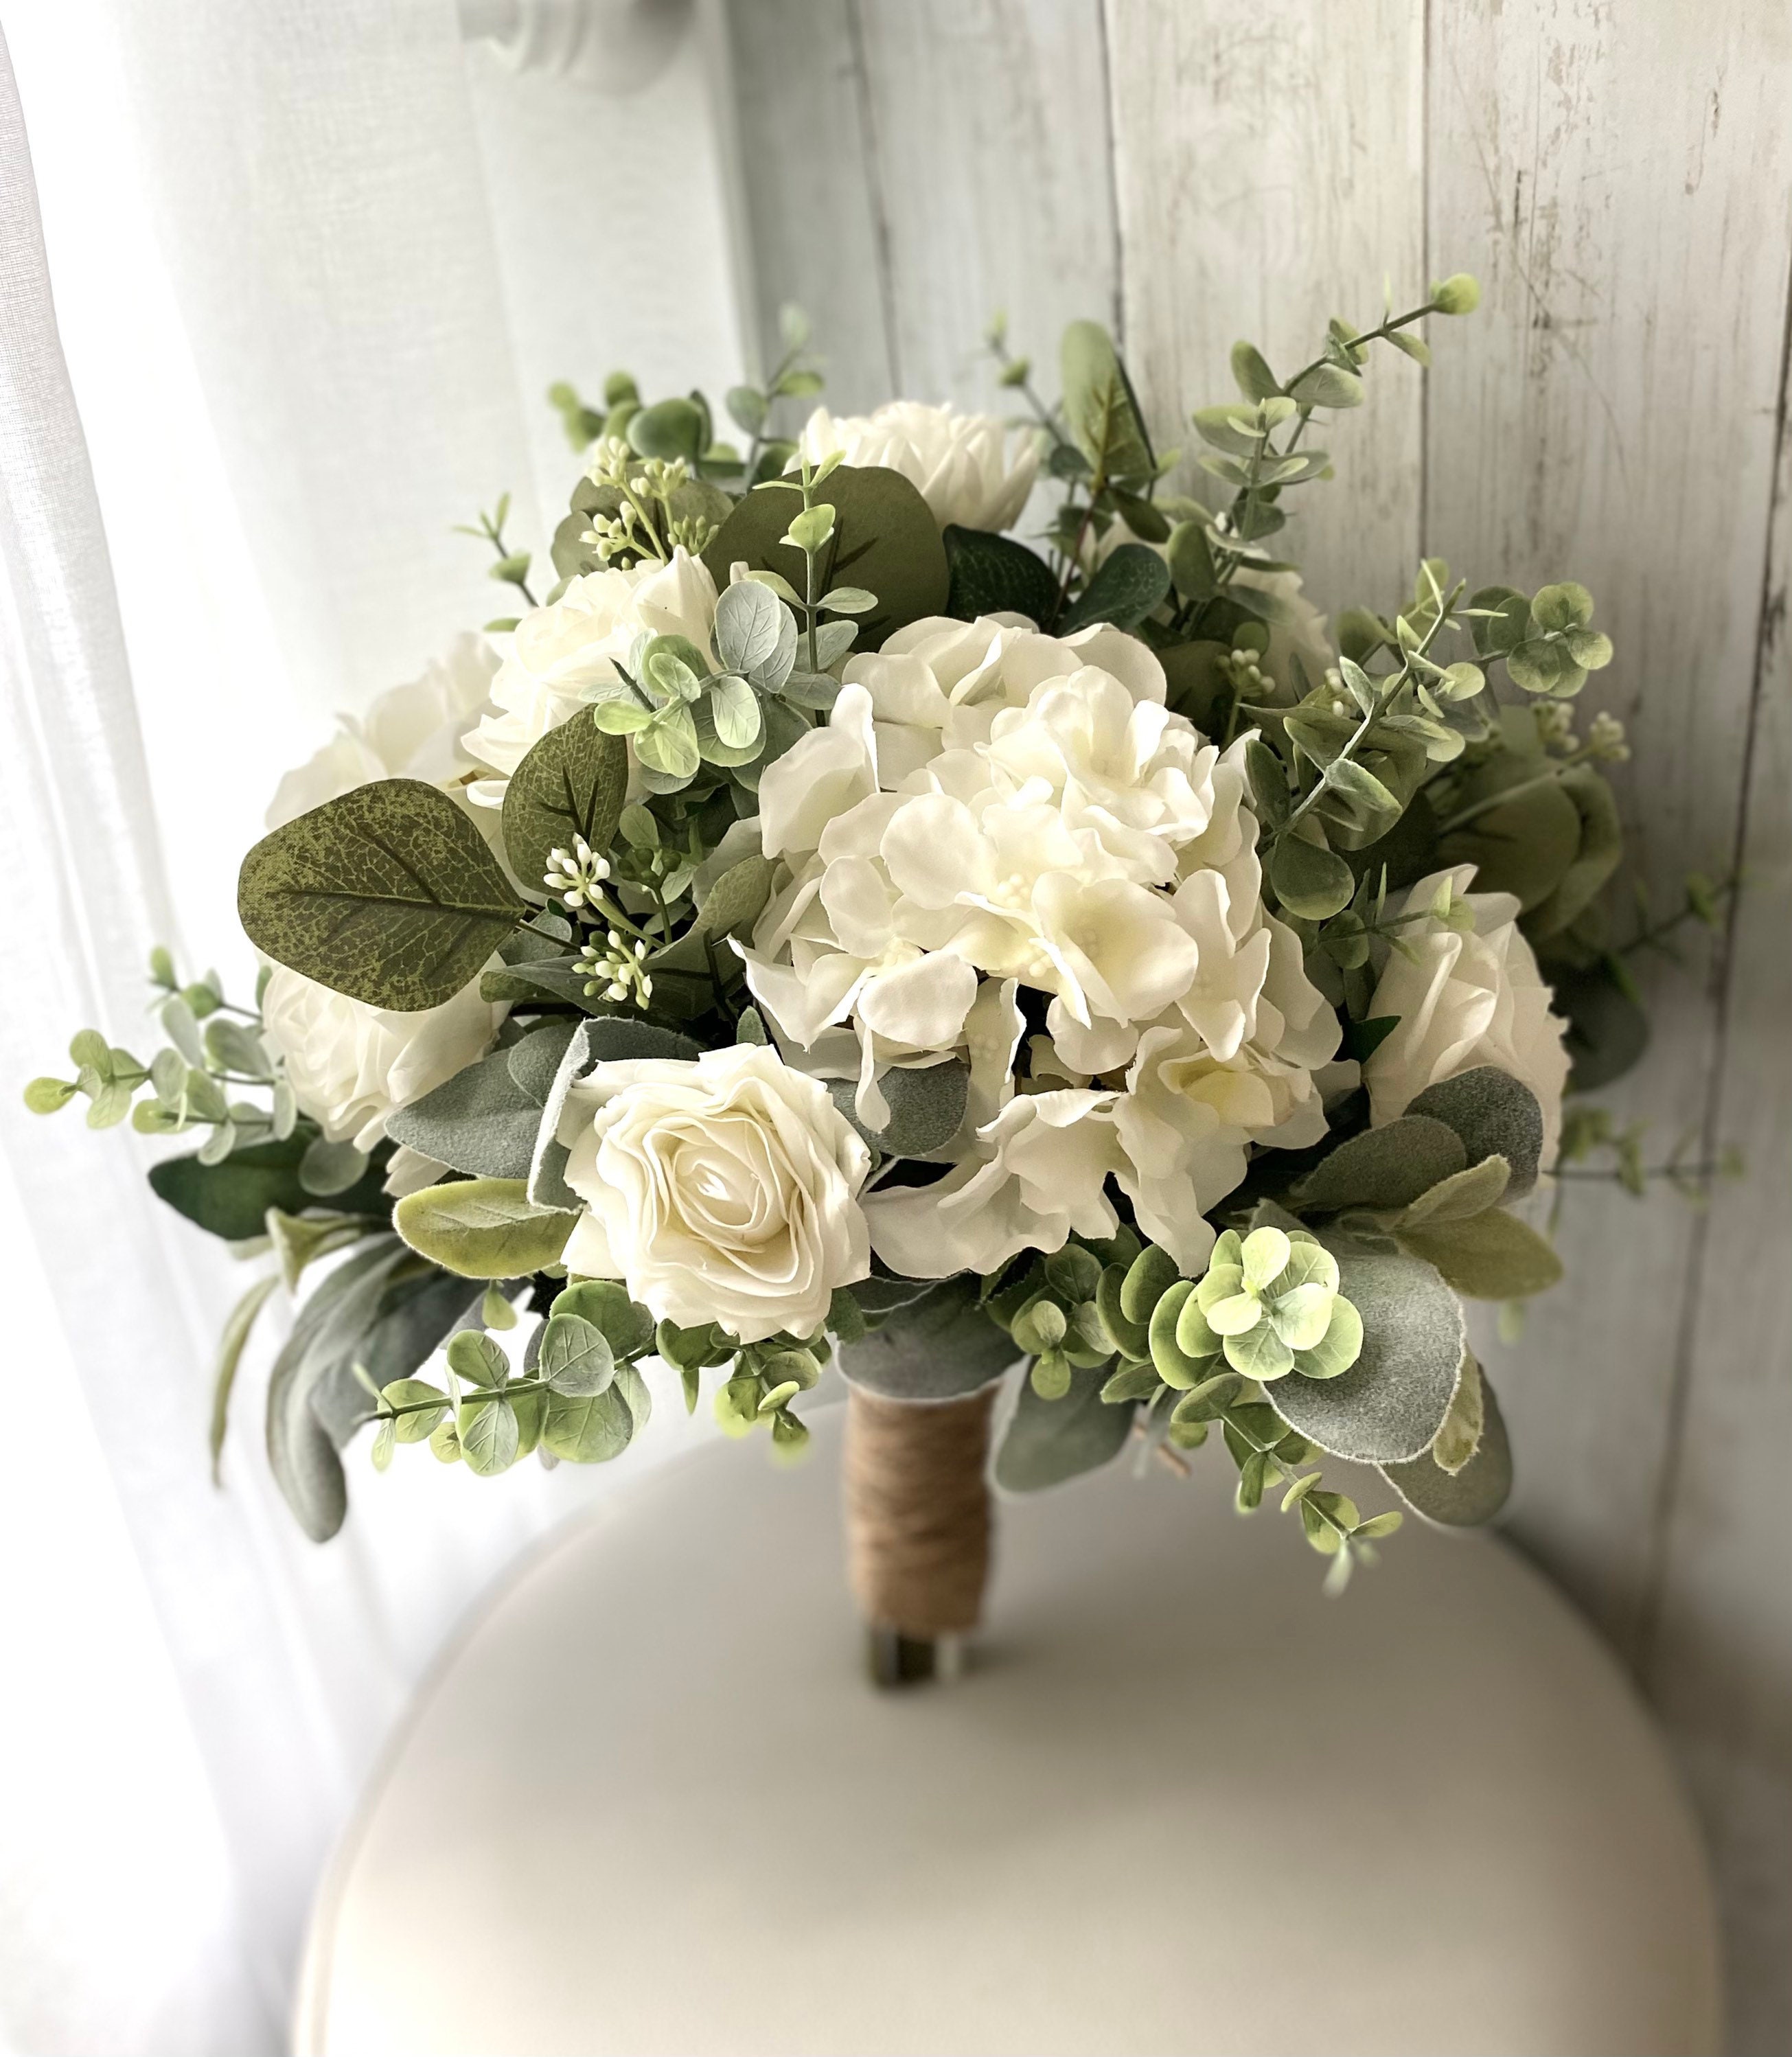 Image of Bouquet of bridal veil hydrangeas in white